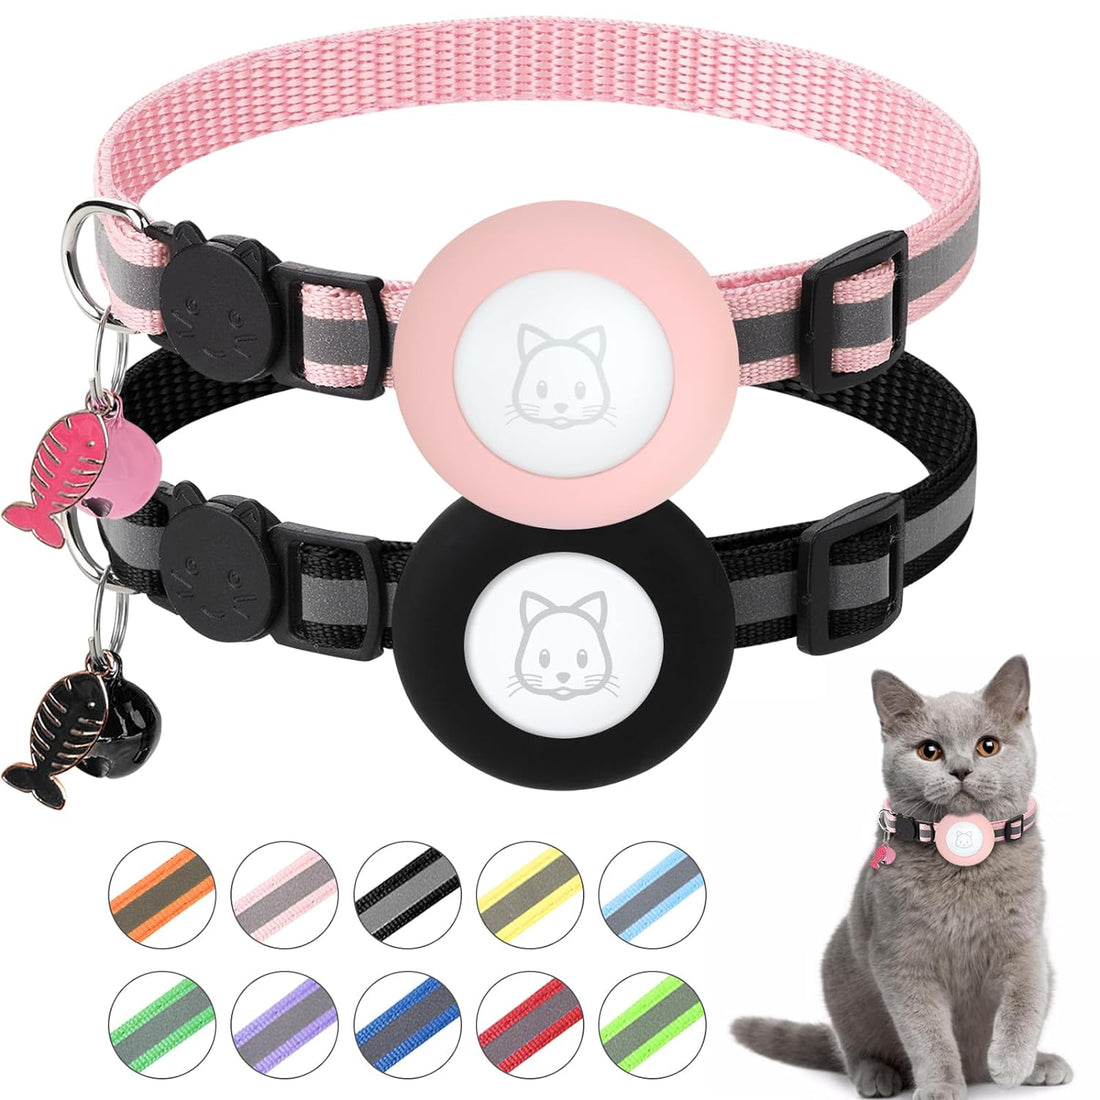 Airtag Cat Collar, Air tag Cat Collar with Bell and Safety Buckle in 3/8" Width, Reflective Collar with Waterproof Airtag Holder Compatible with Apple Airtag for Cat Dog Kitten Puppy (Black+Pink)